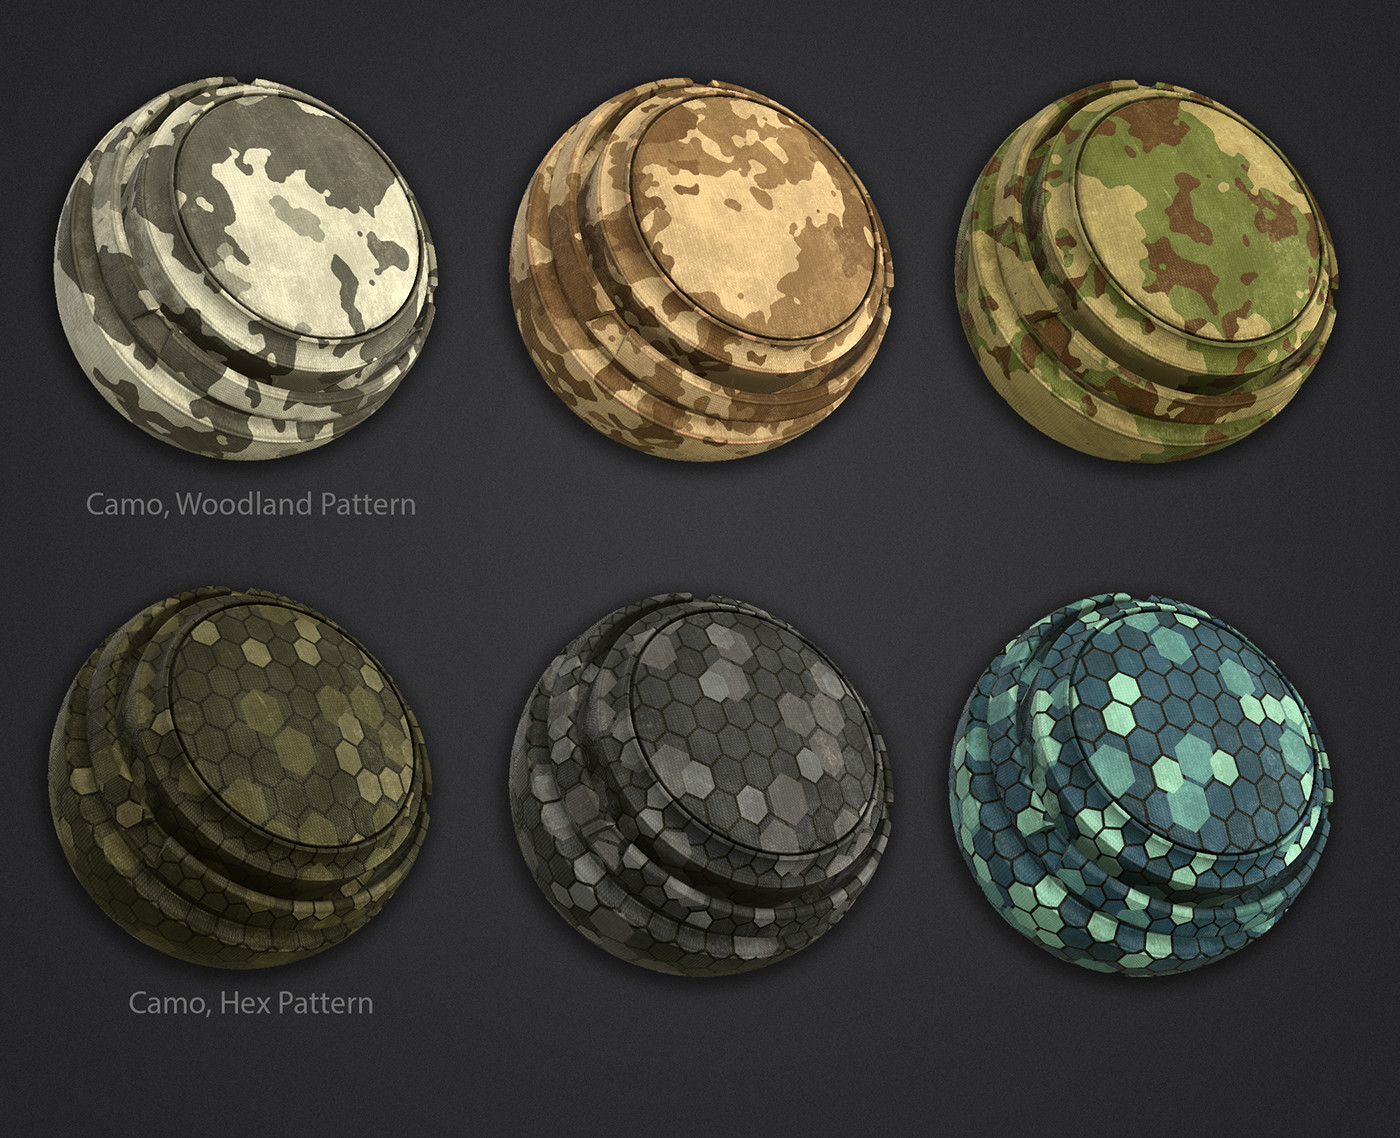 Custom camo materials.  Each color in the patterns can be customized in Painter for easy variation.  

Base canvas material was created by Austin Martin.